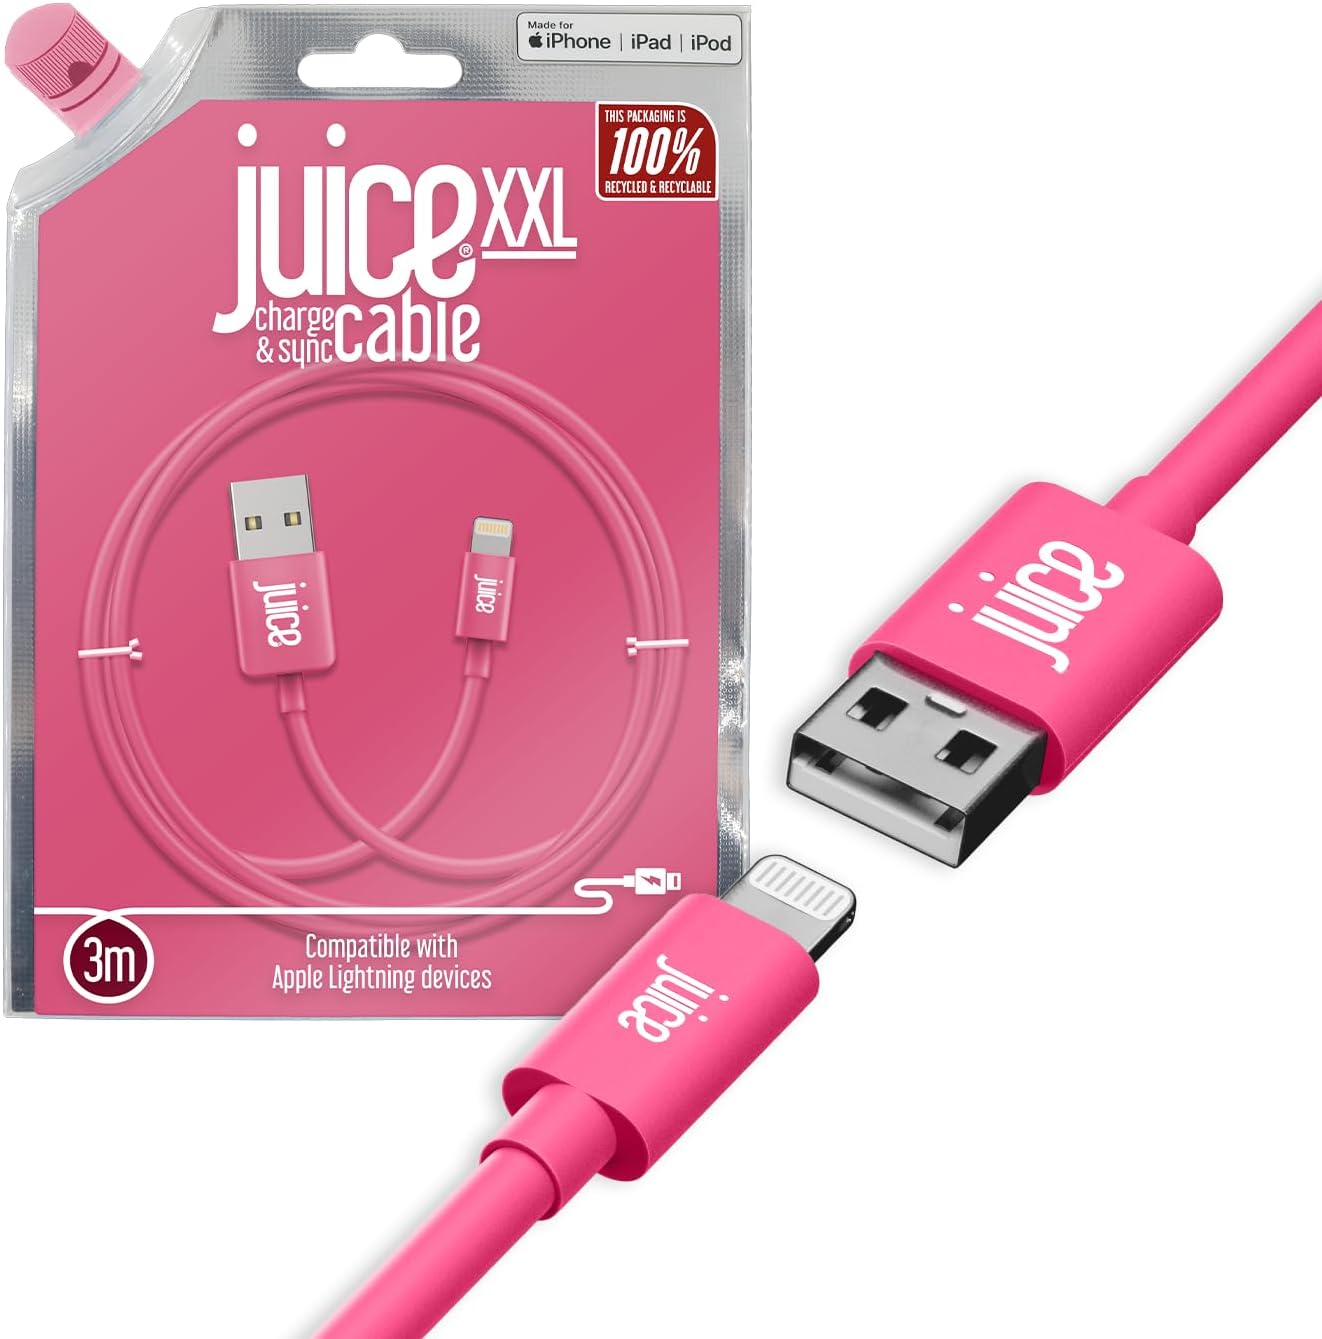 Juice Apple iPhone Lightning 3m Charger and Sync Cable 4204